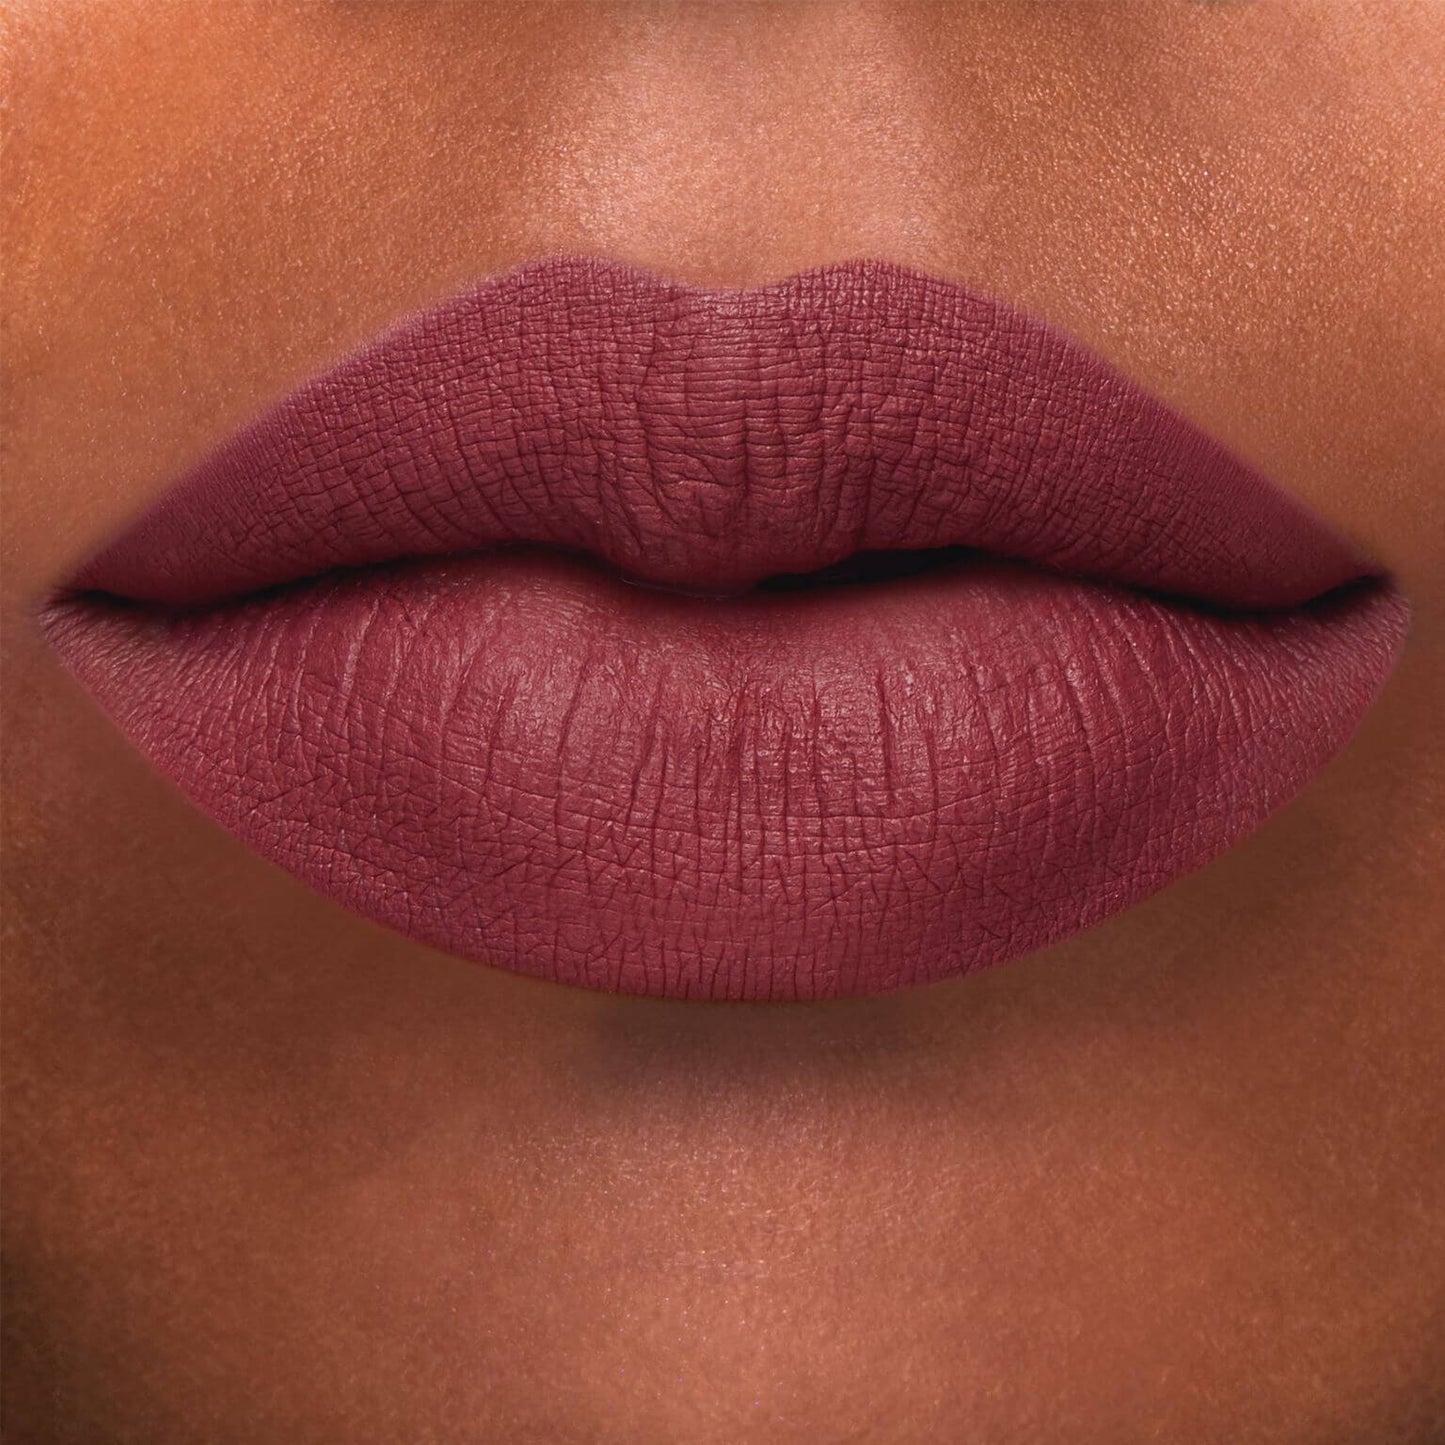 swatch of Colourpop liquid lipstick tulle available at Heygirl.pk for delivery in Pakistan